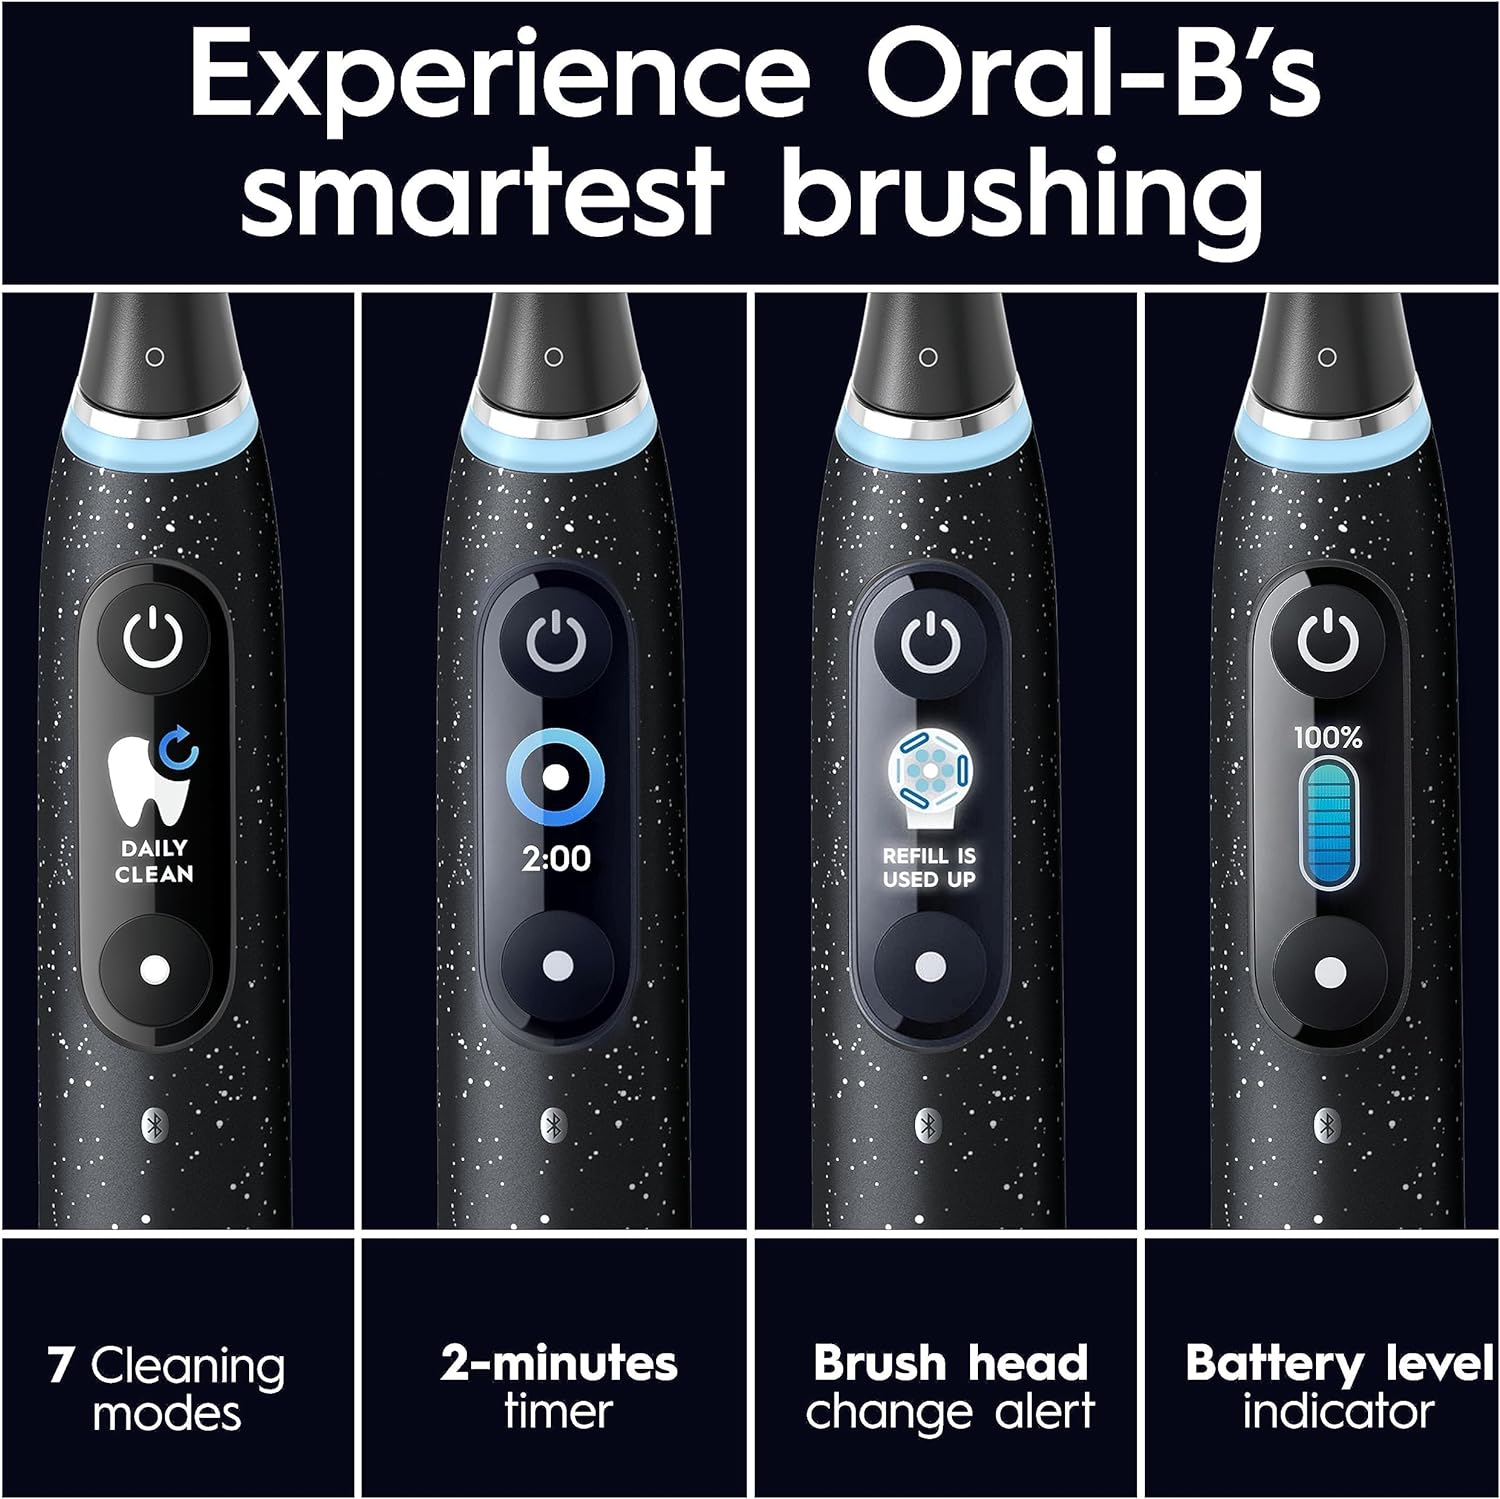 Braun Oral-B iO Series 10 Electric Rechargeable Toothbrush - Cosmic Black